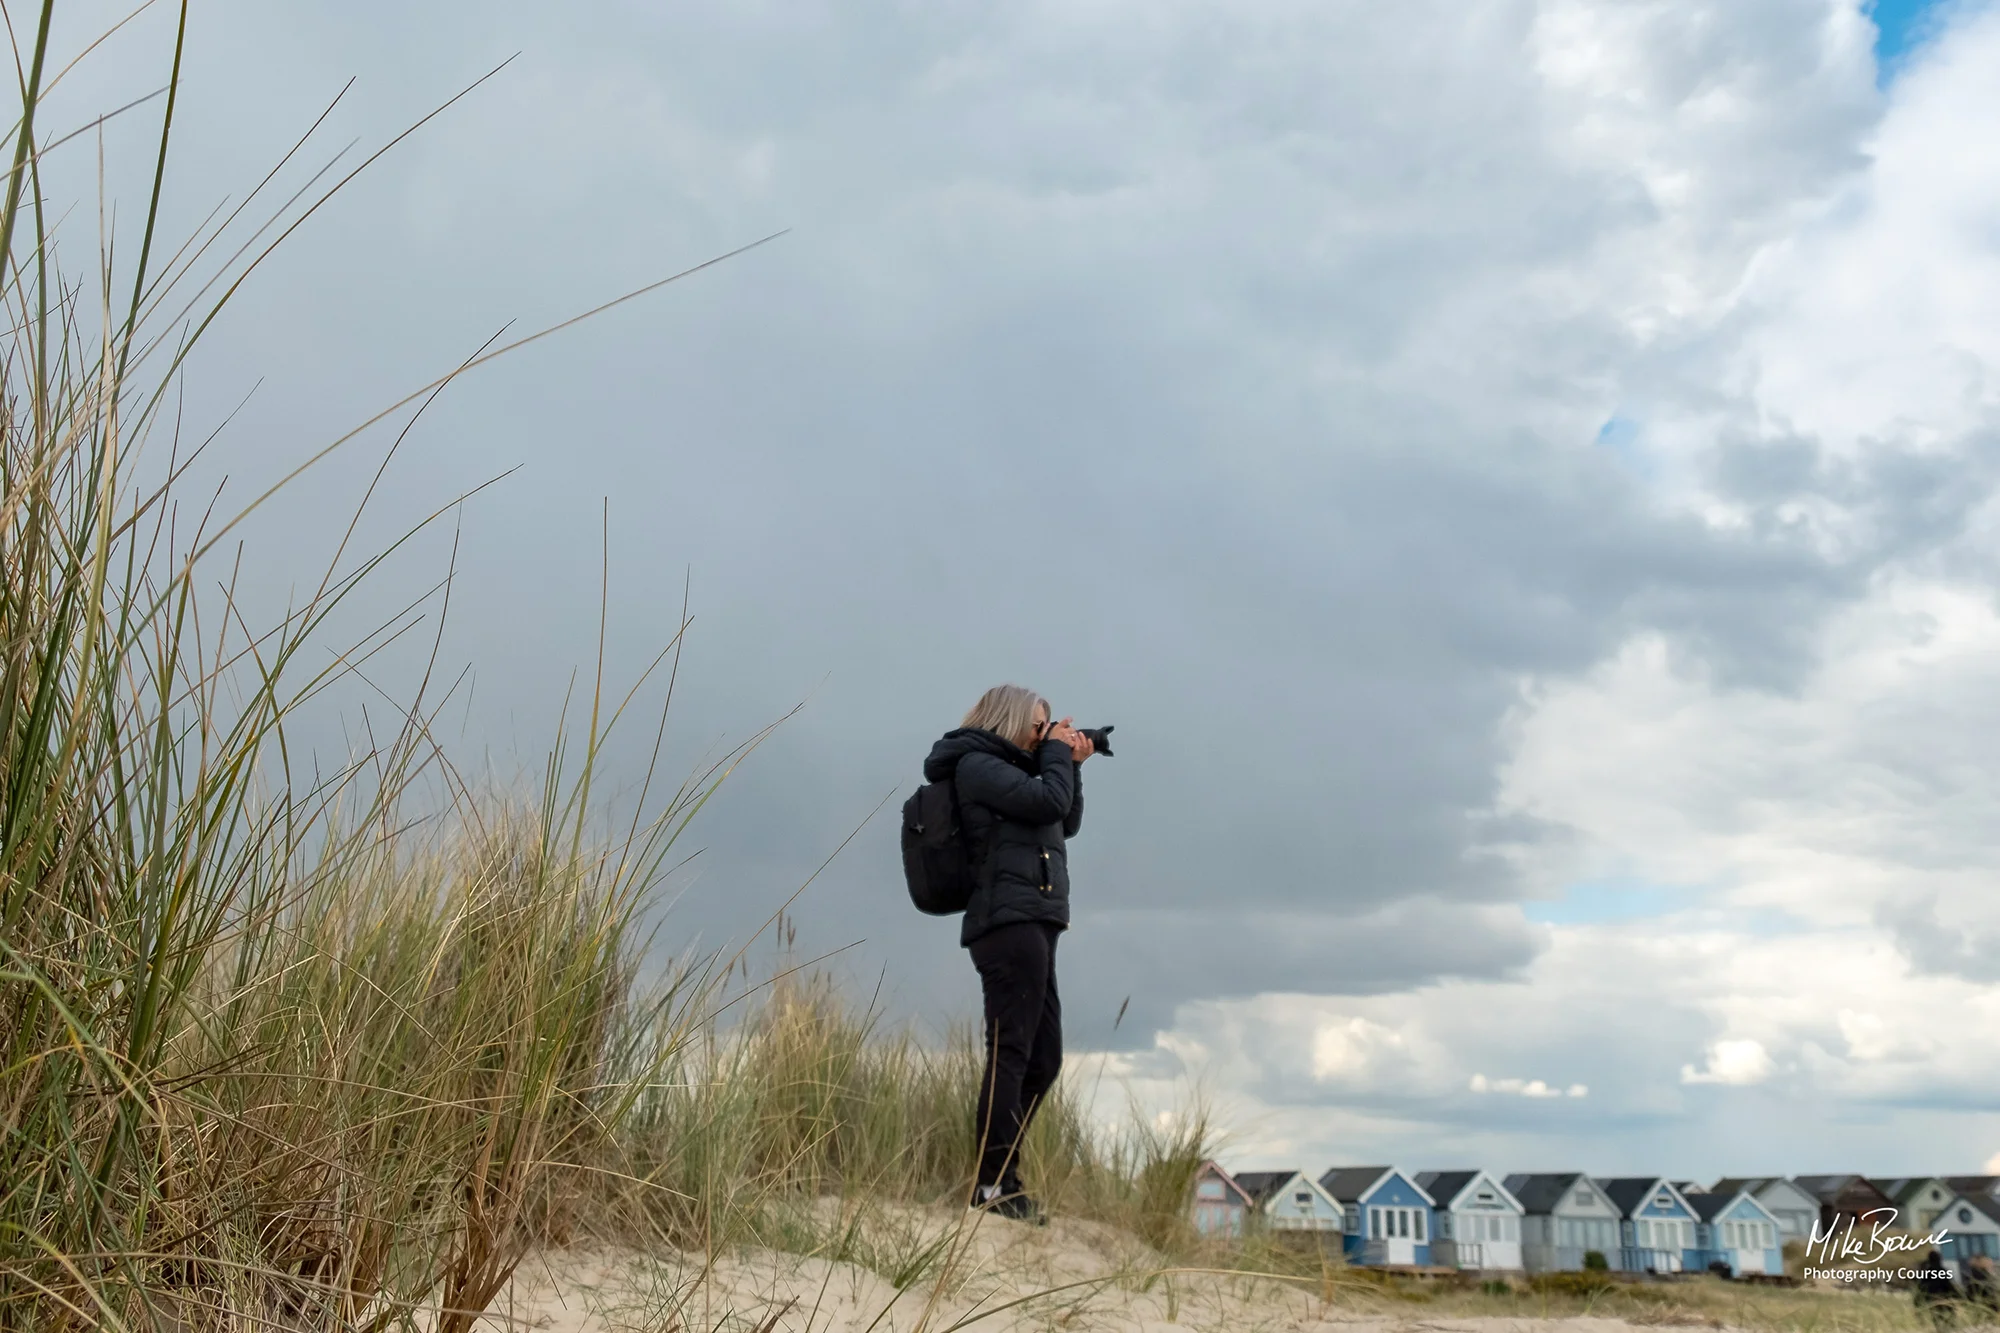 Lone photographer standing on sand dune with long grasses